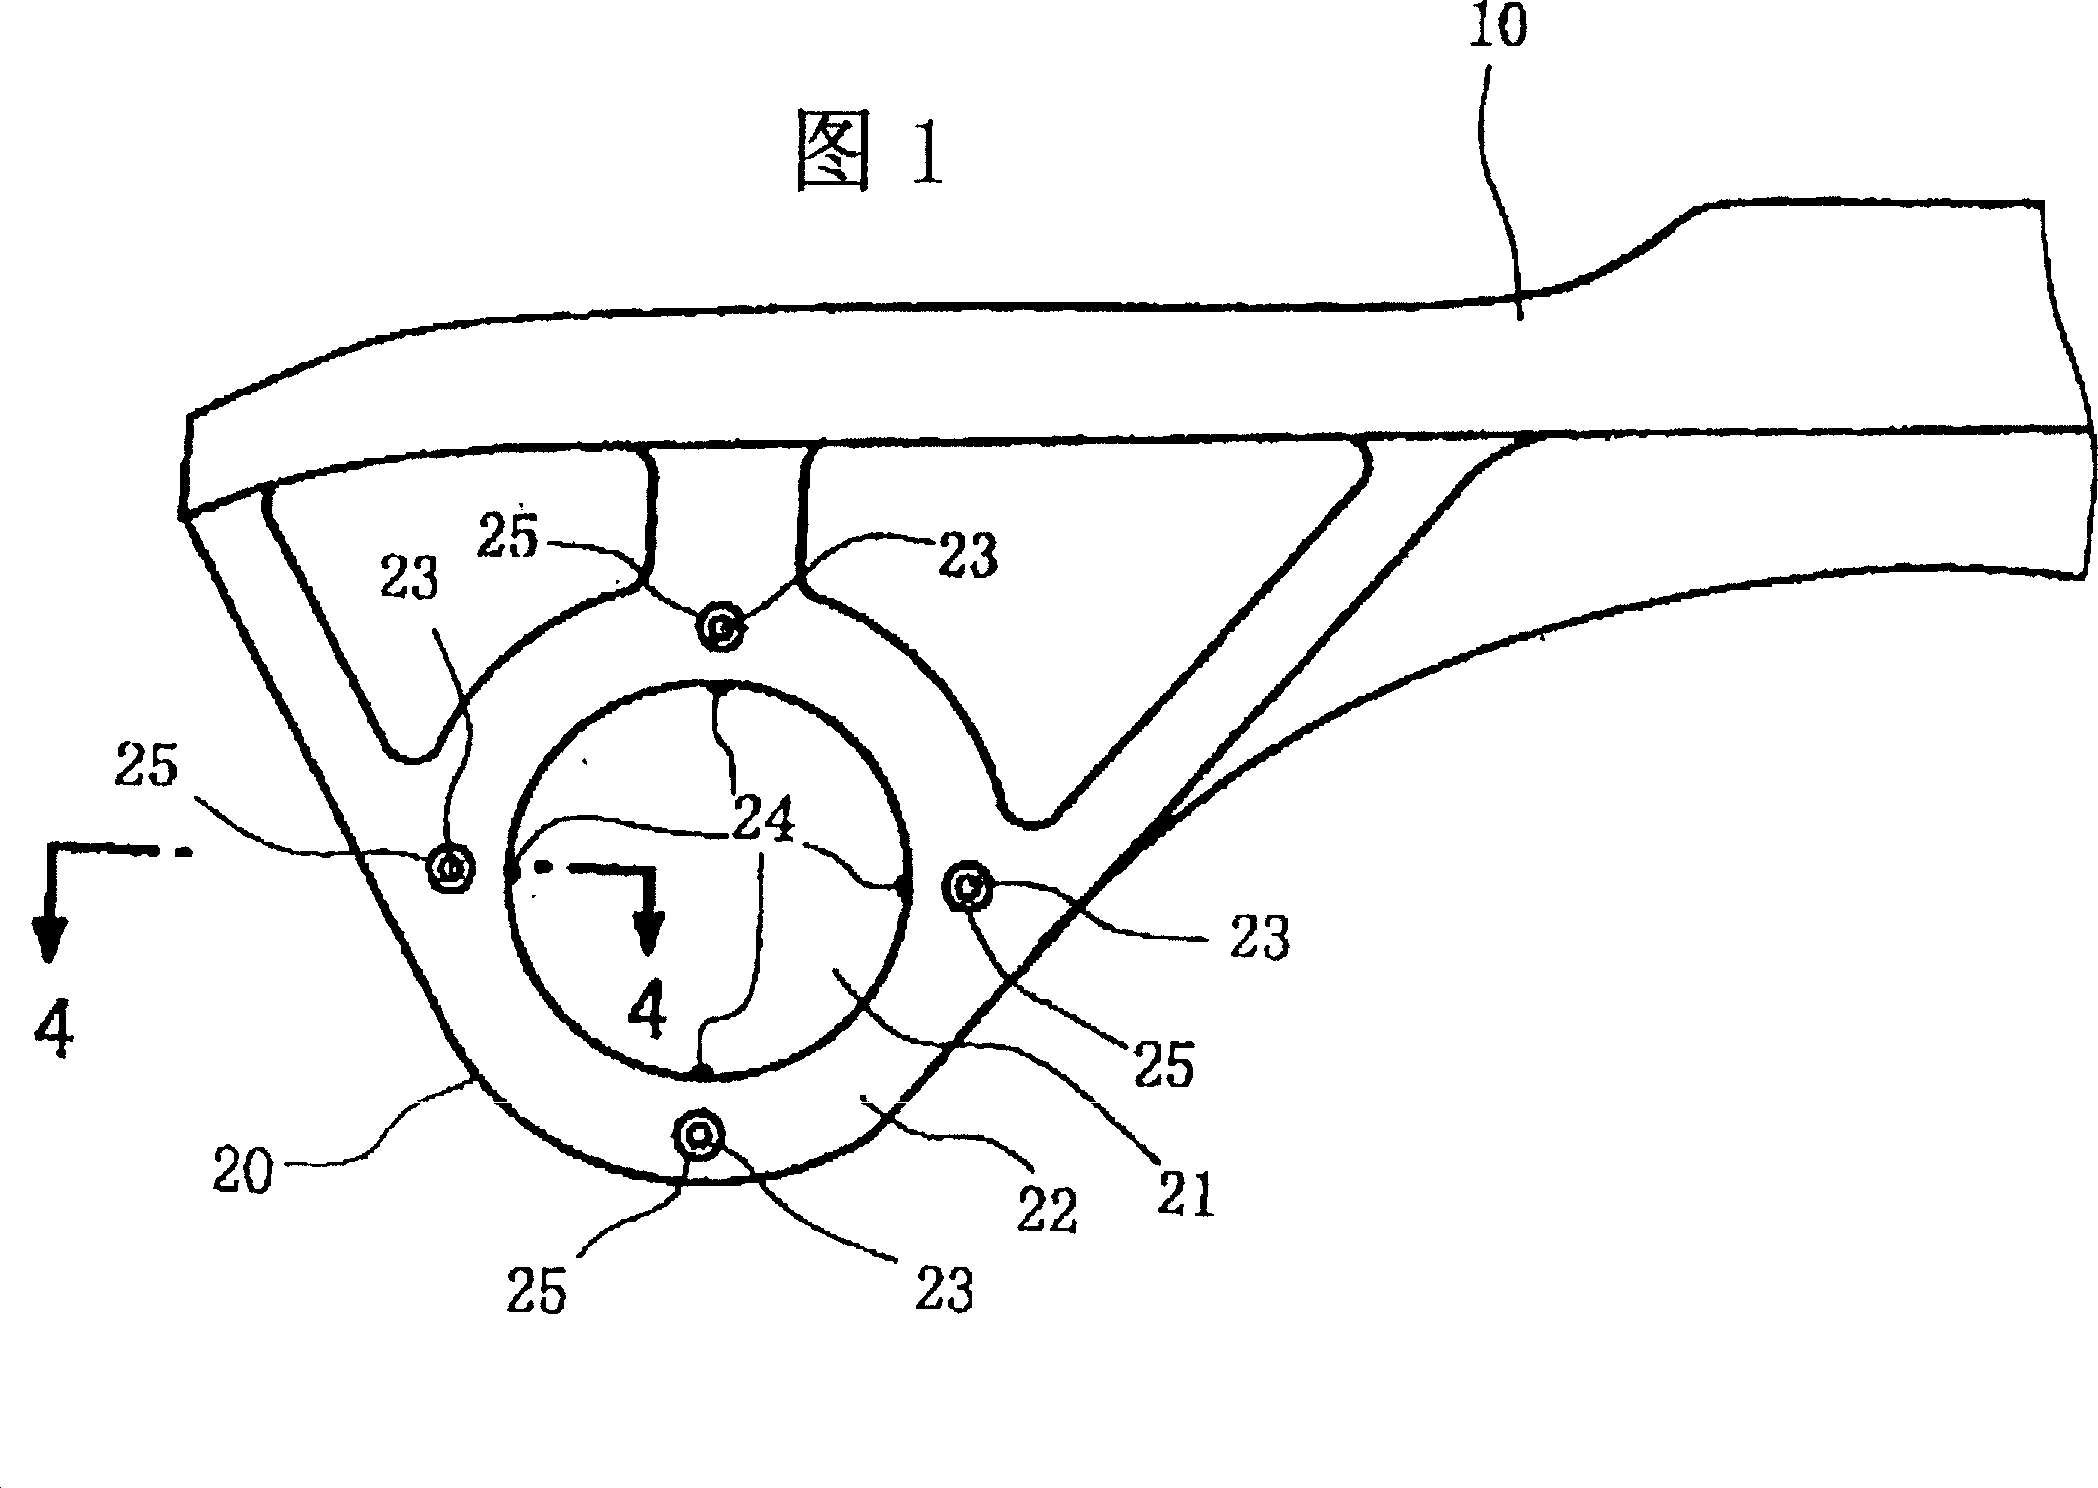 Installation structure of cam chain guide apparatus